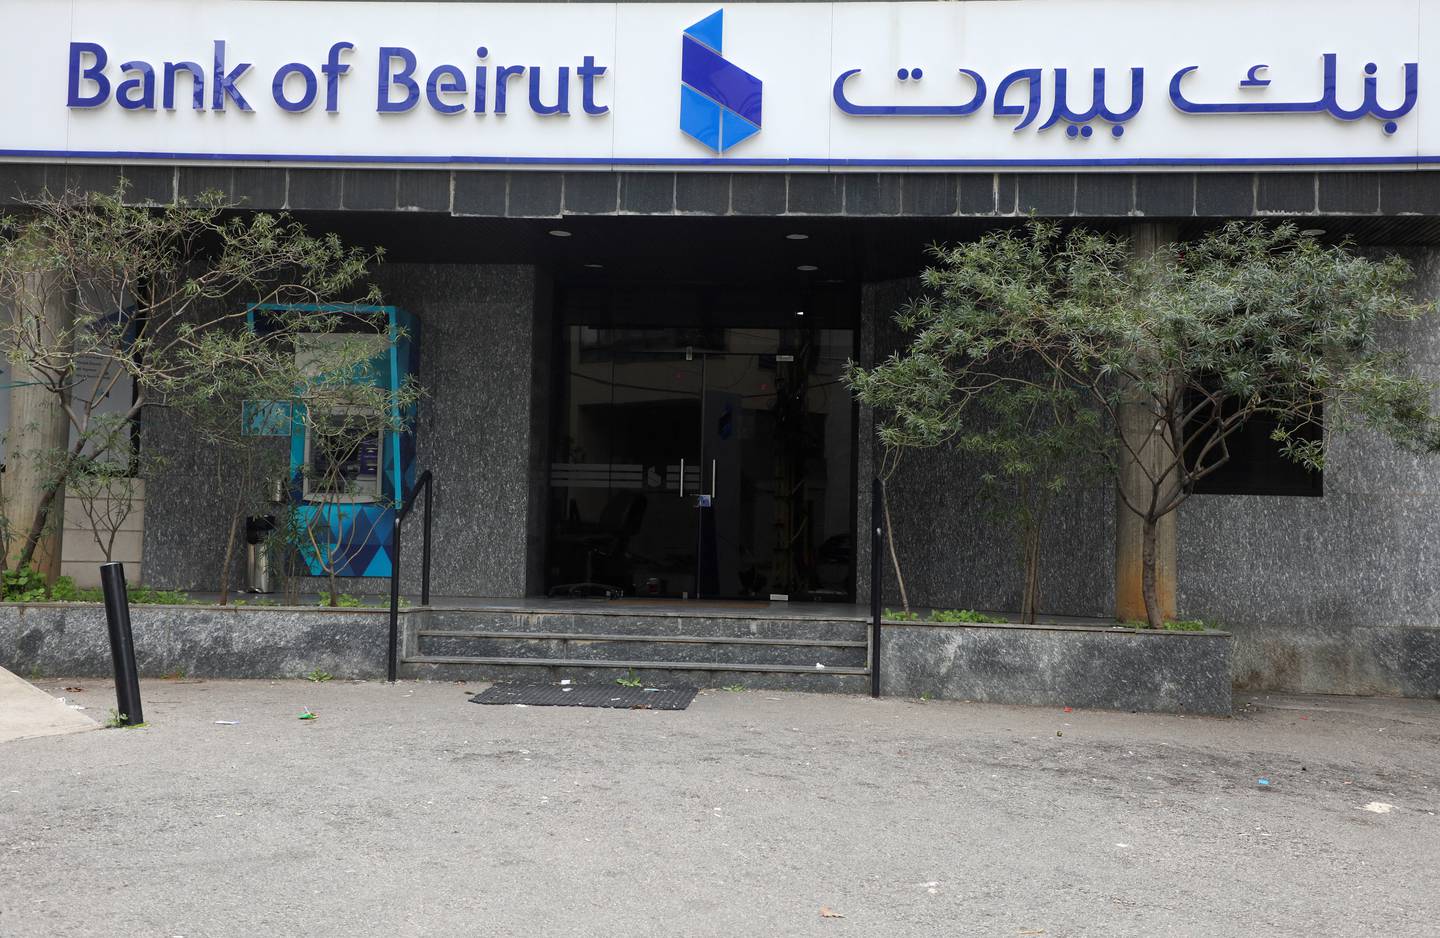 A closed Bank of Beirut branch on the first of a two-day strike. Reuters